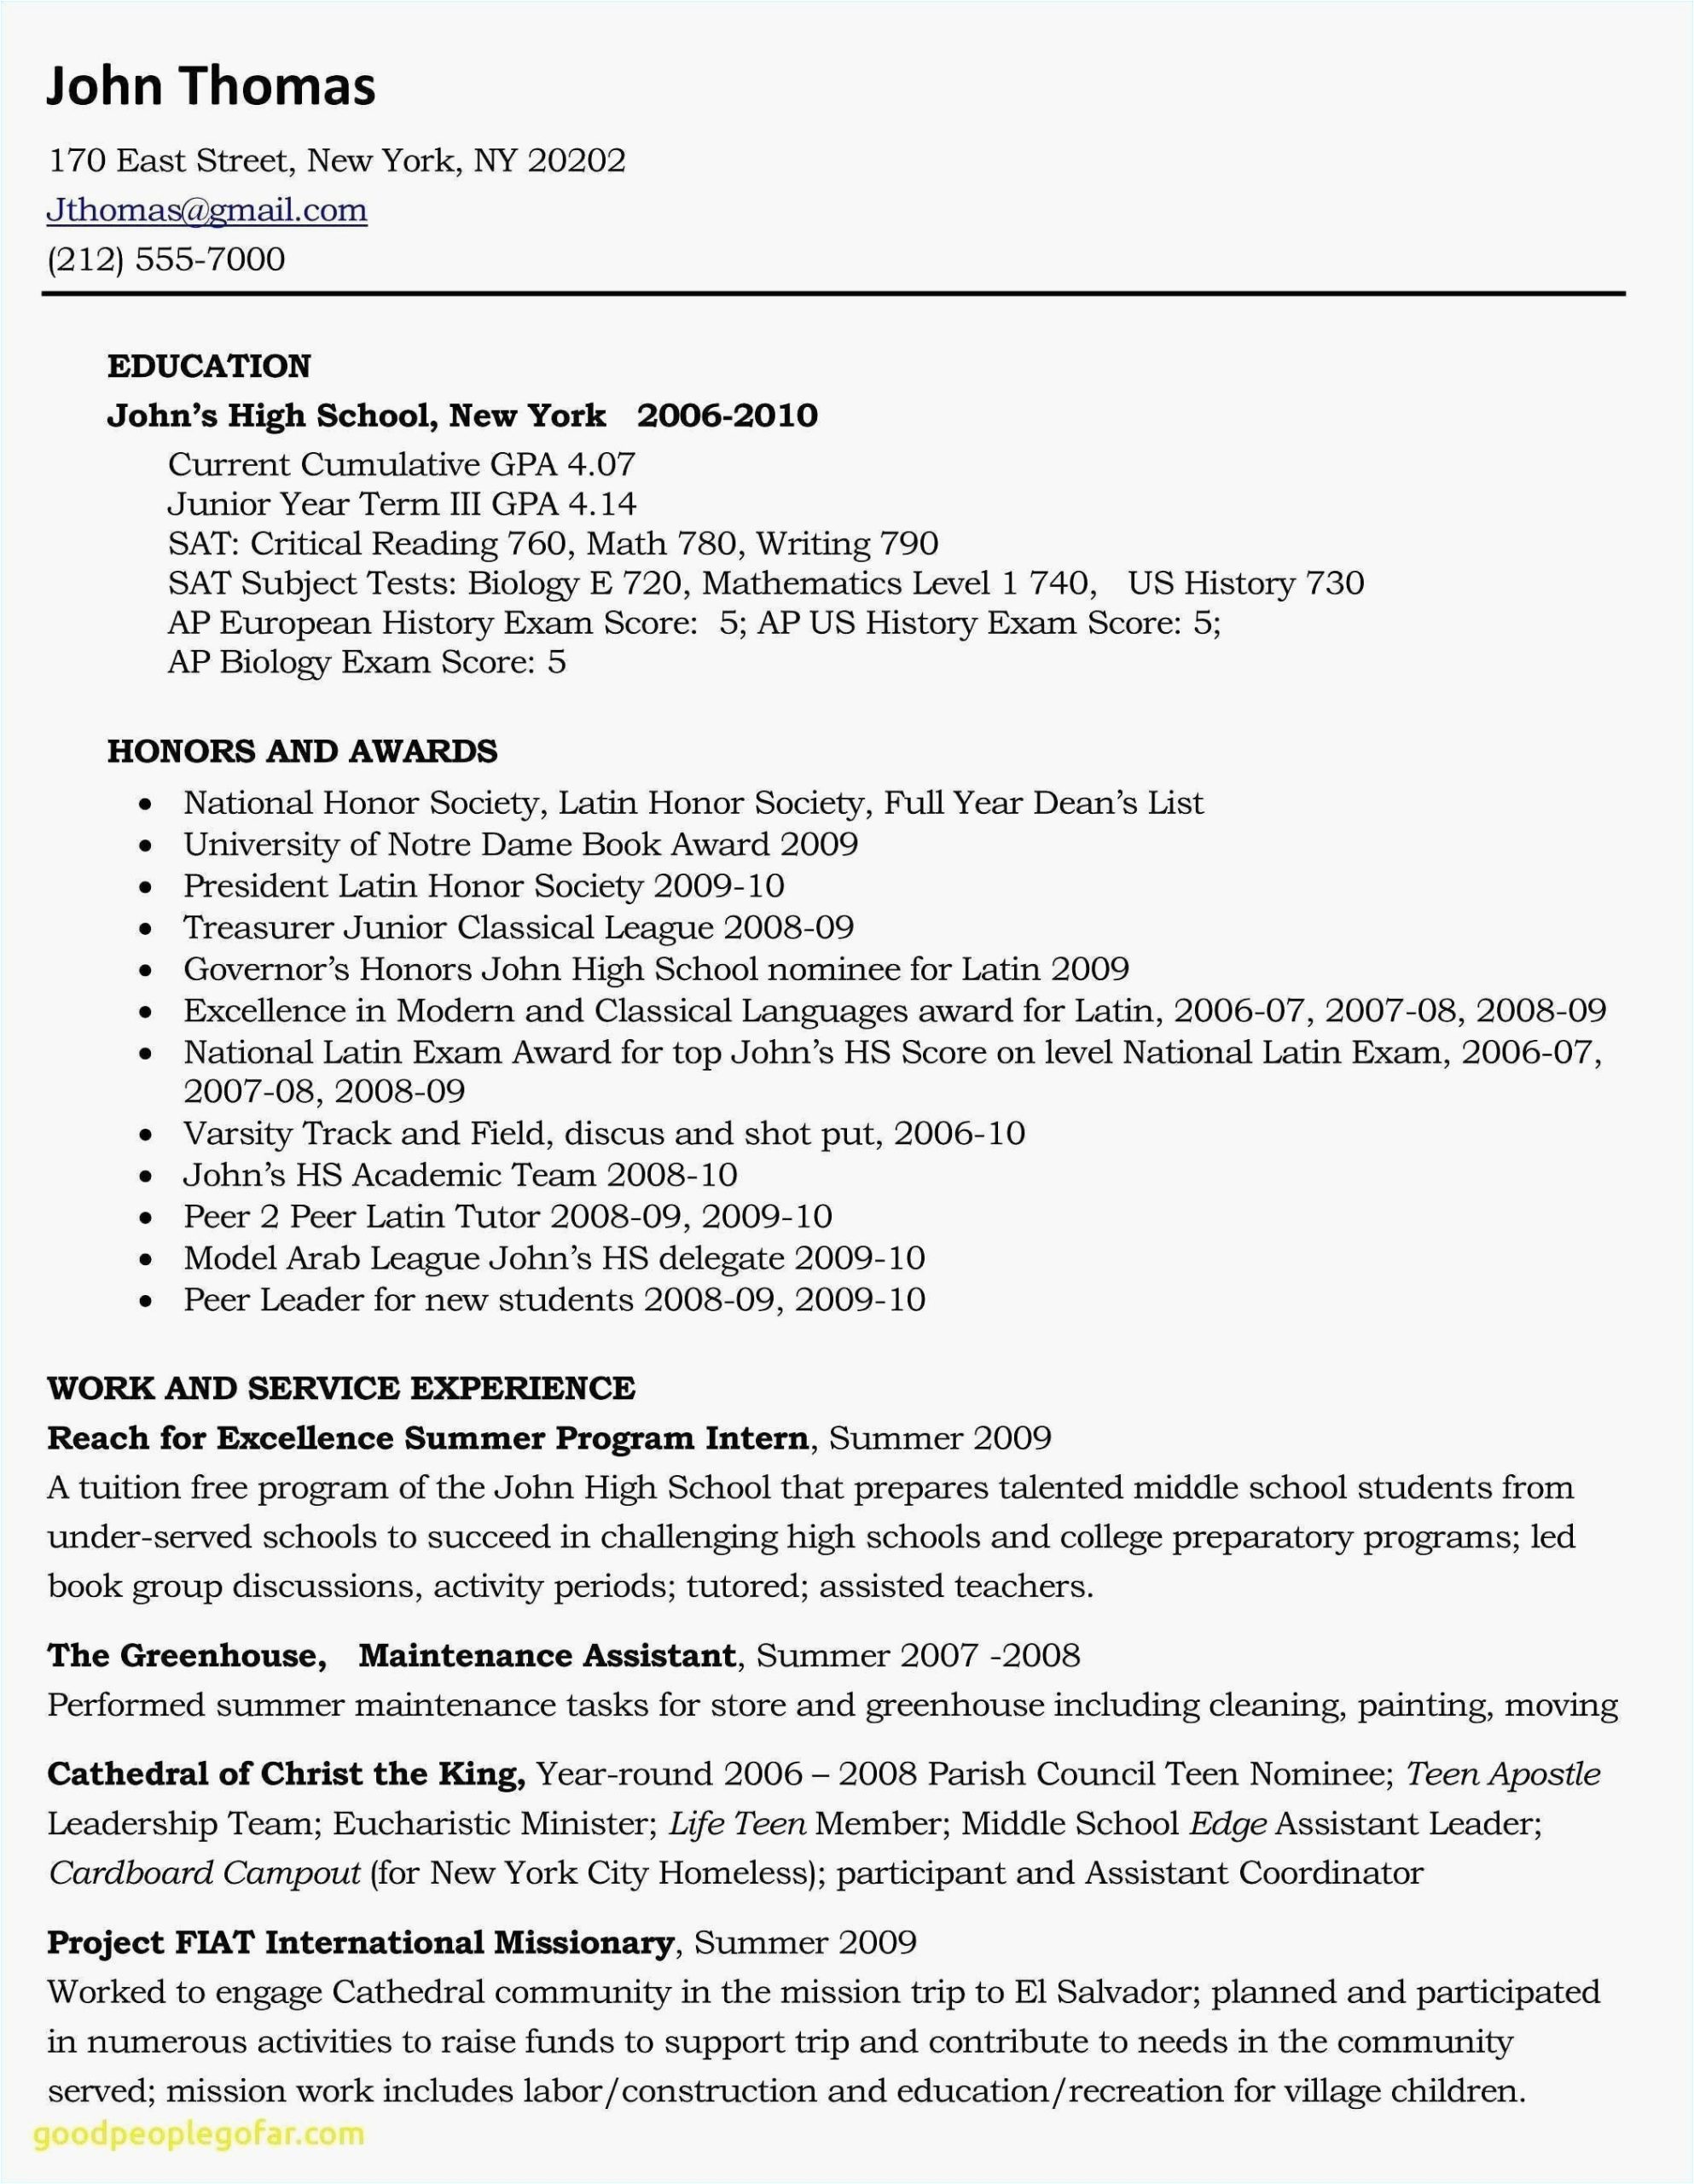 Sample School Resume for High School Applications Can You Round Up Gpa Resume Beautiful Unique Build A Resume In 2020